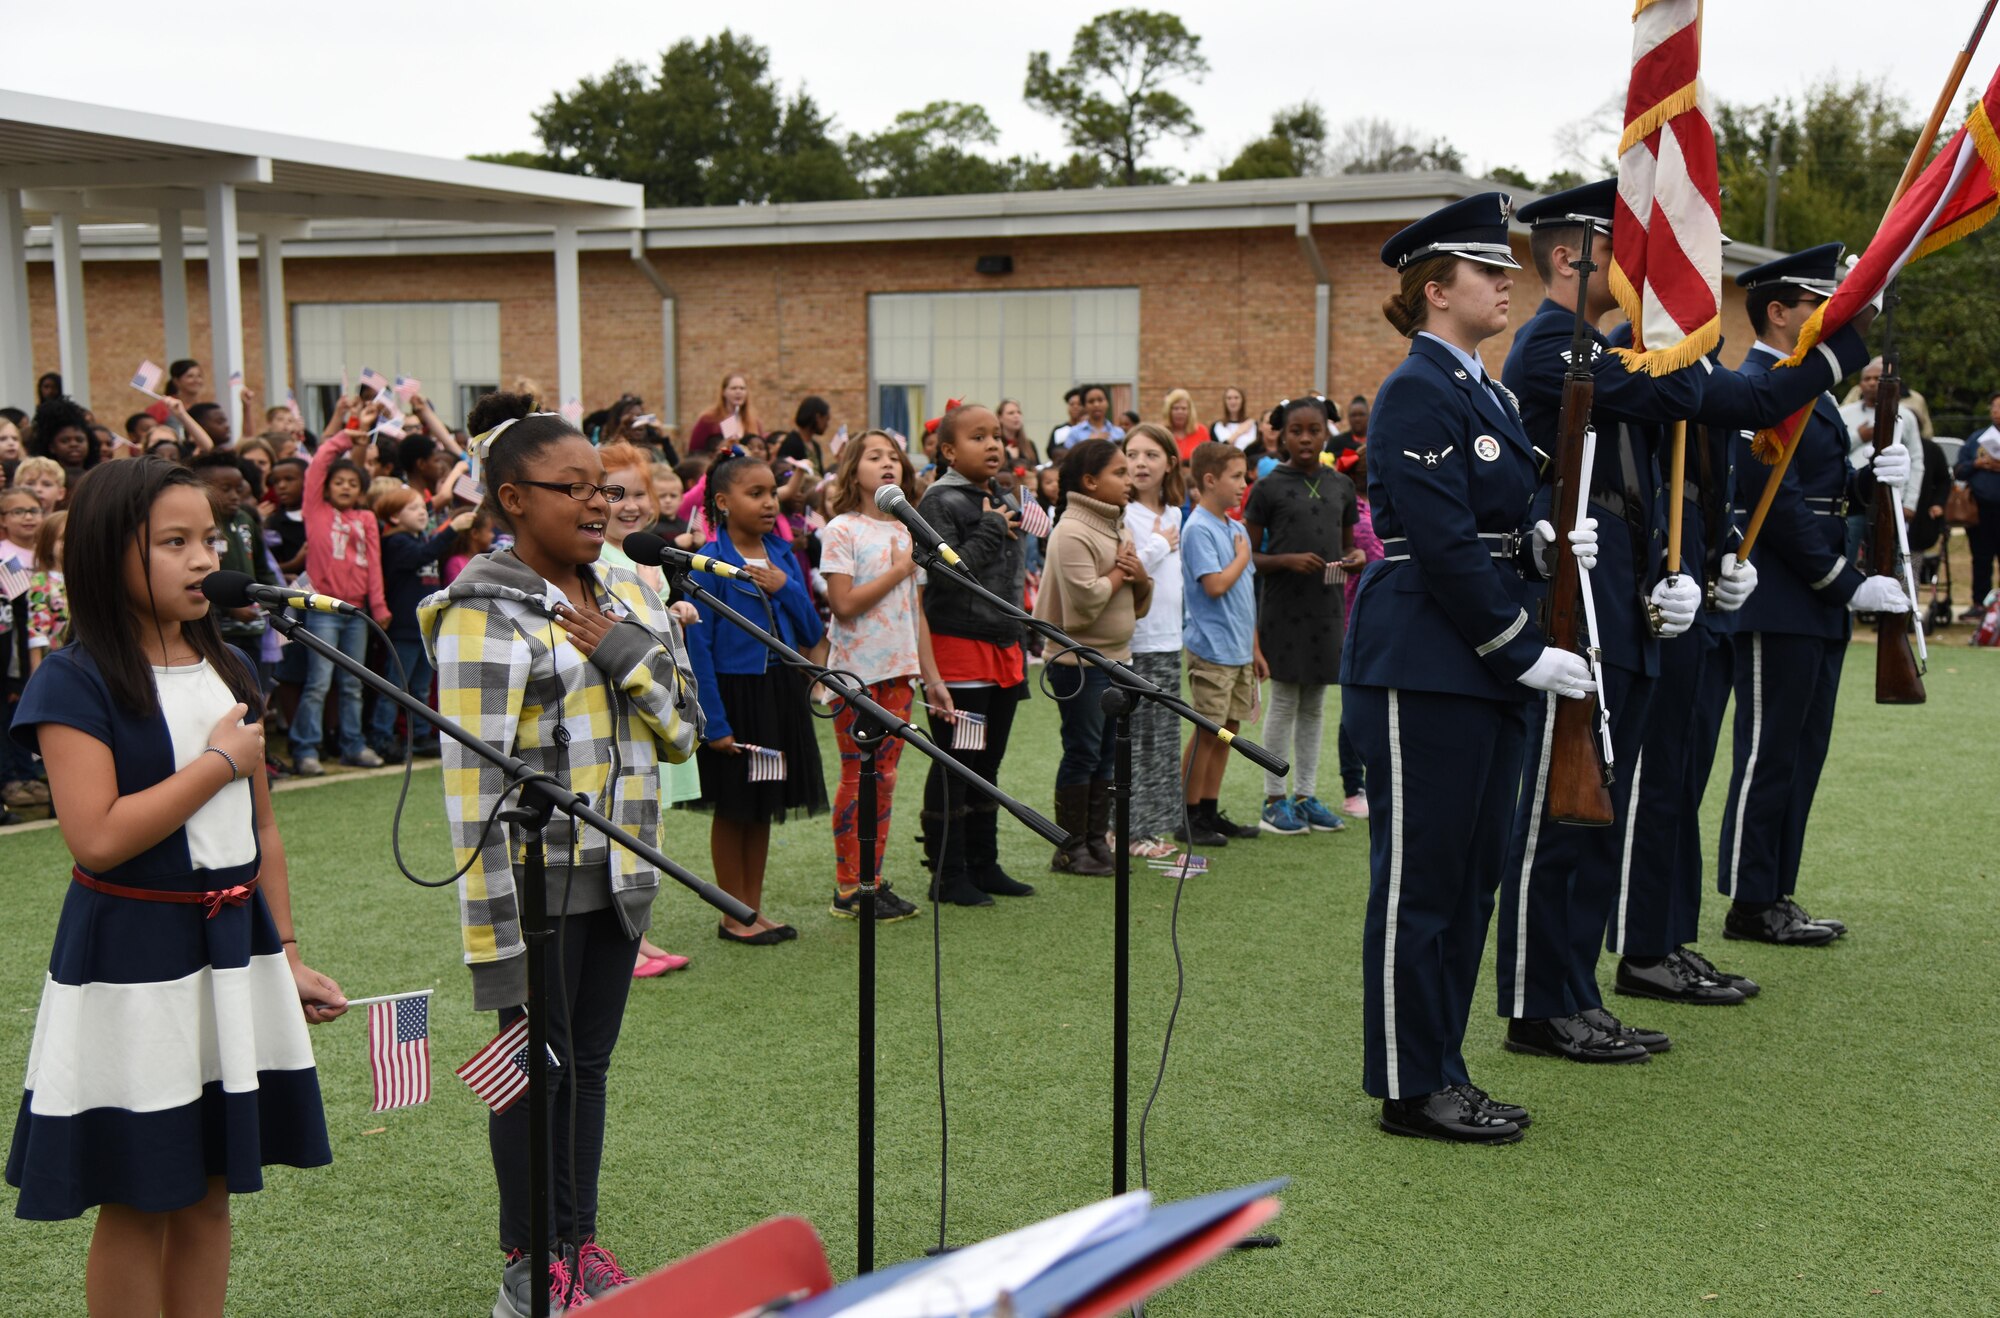 Students at Jeff Davis Elementary School recite the Pledge of Allegiance during a Veterans Day Celebration as the Keesler Honor Guard post the colors Nov. 11, 2016, in Biloxi, Miss. During the event, students delivered the Pledge of Allegiance and sang several patriotic songs. Keesler Air Force Base leadership and personnel attended the event. (U.S. Air Force photo by Kemberly Groue/Released)